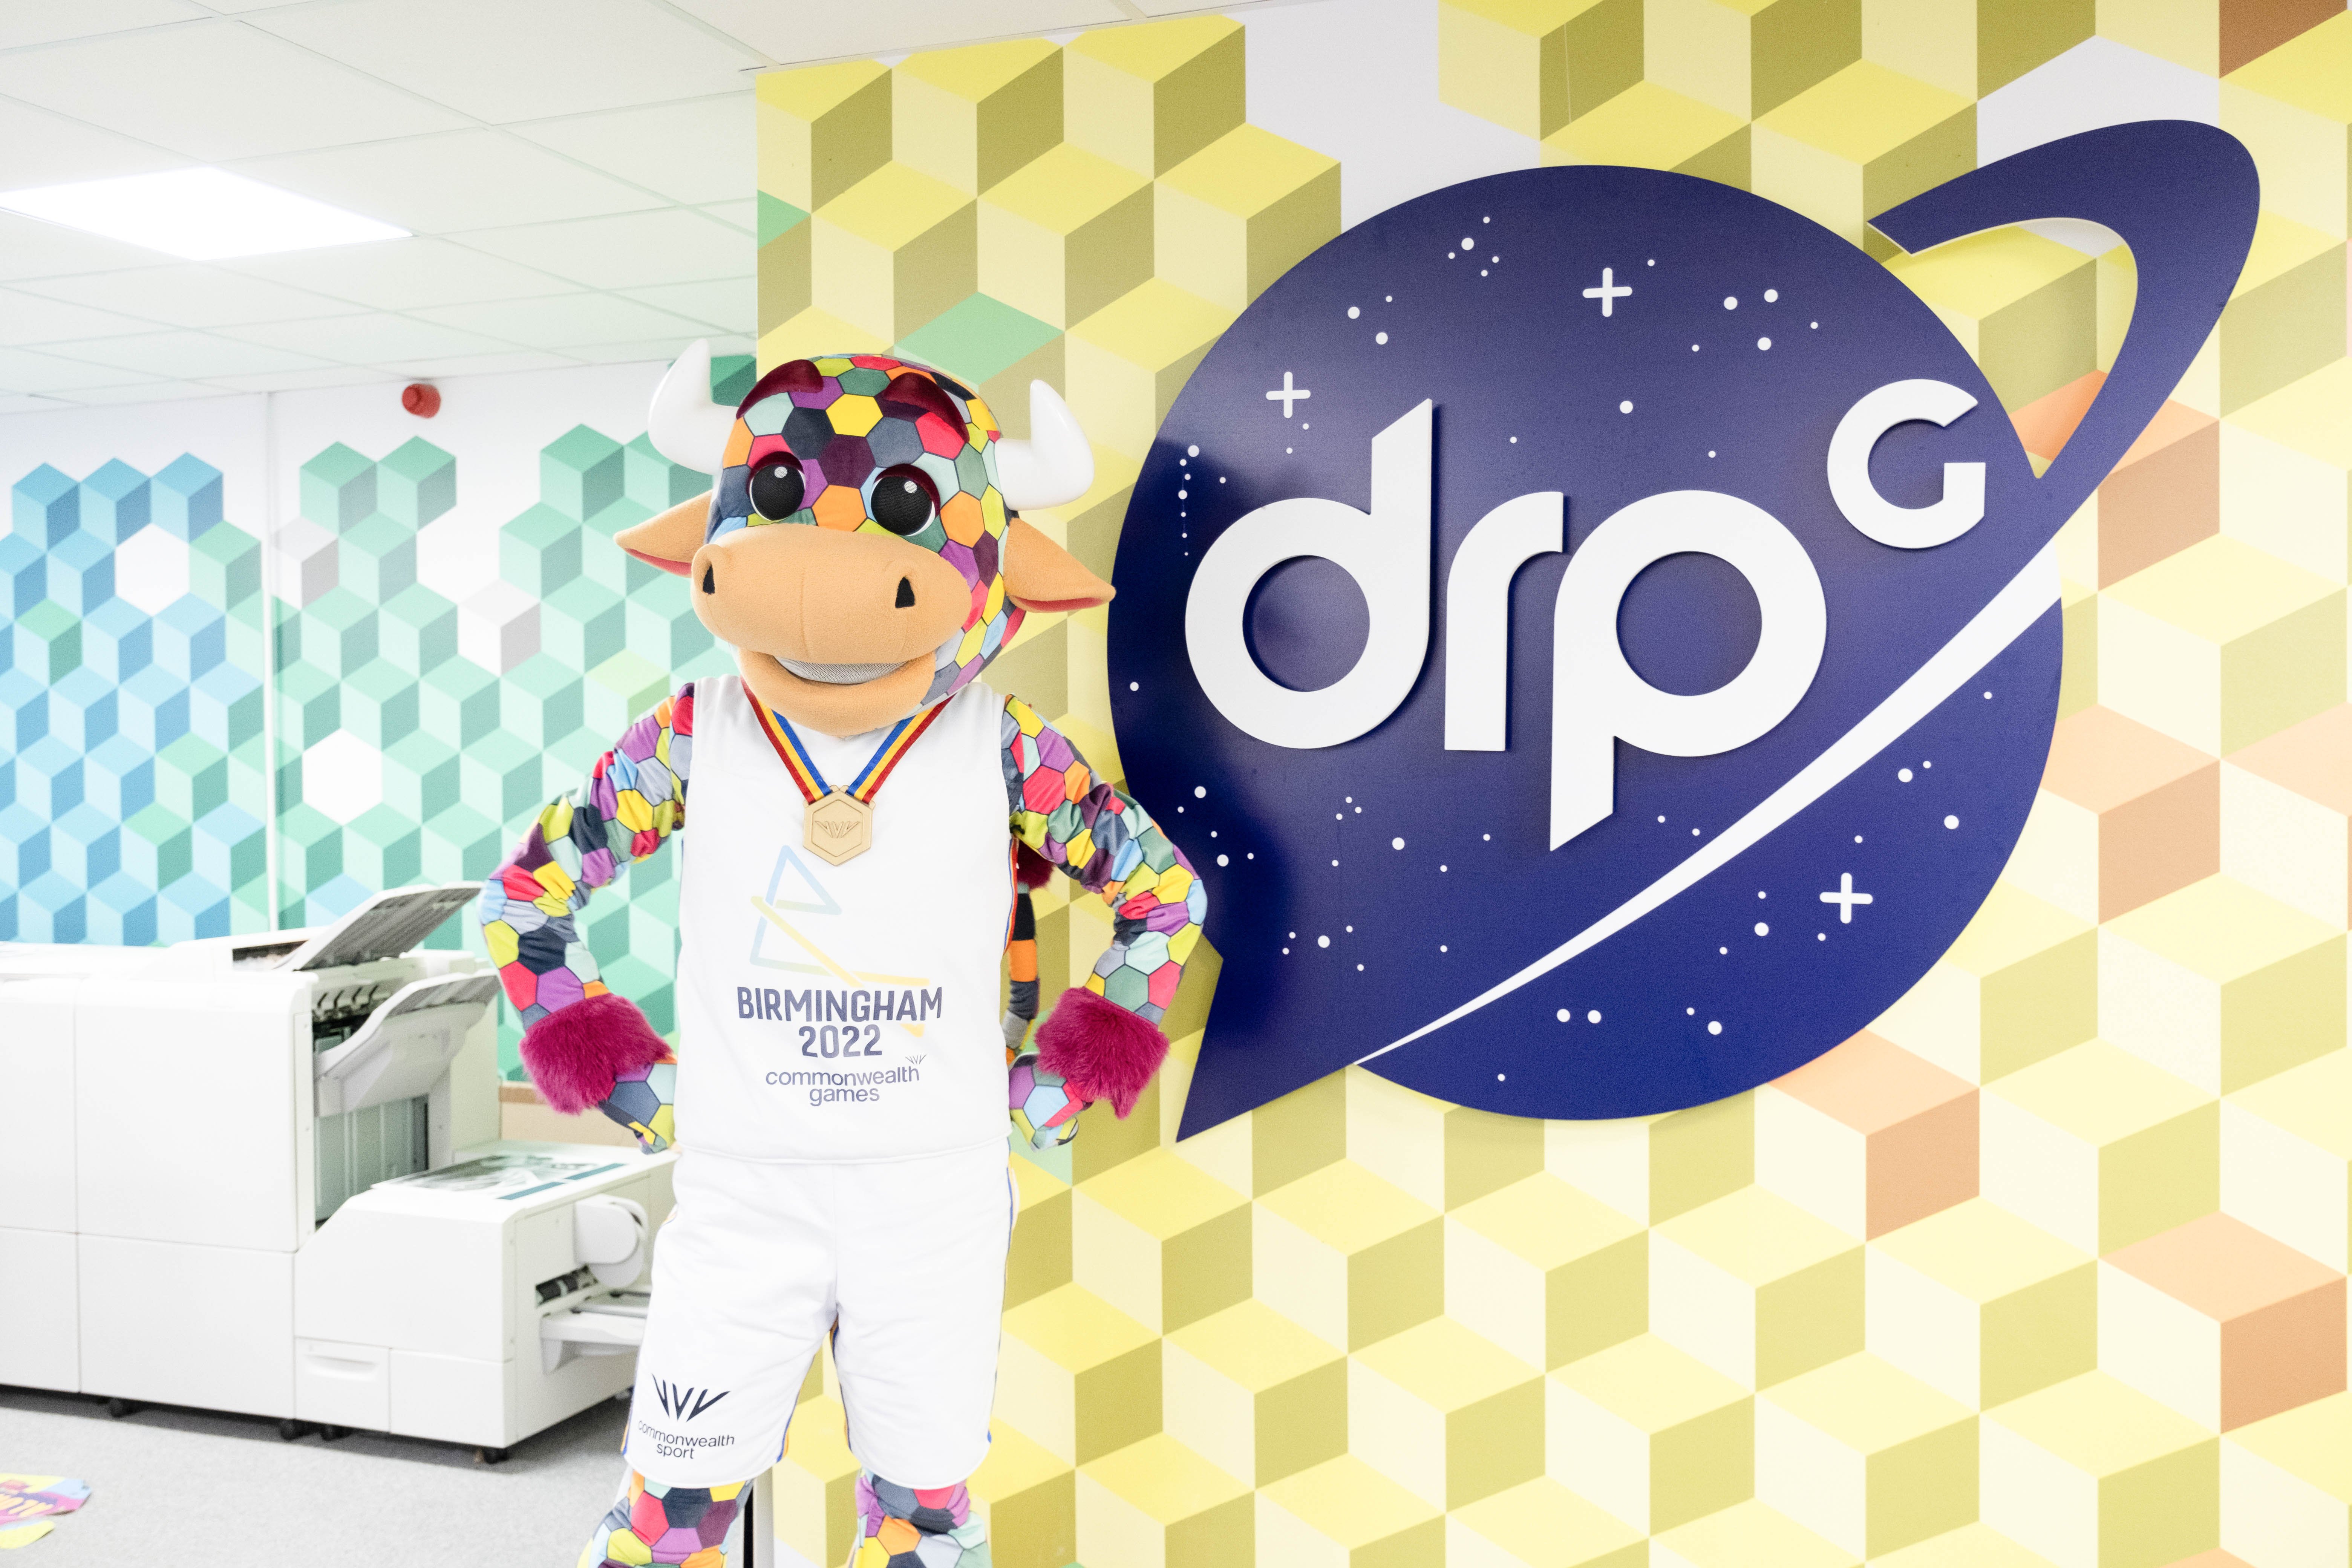 Shot of Billy the Bull from Birmingham 2022 Commonwealth Games at the DRPG offices.